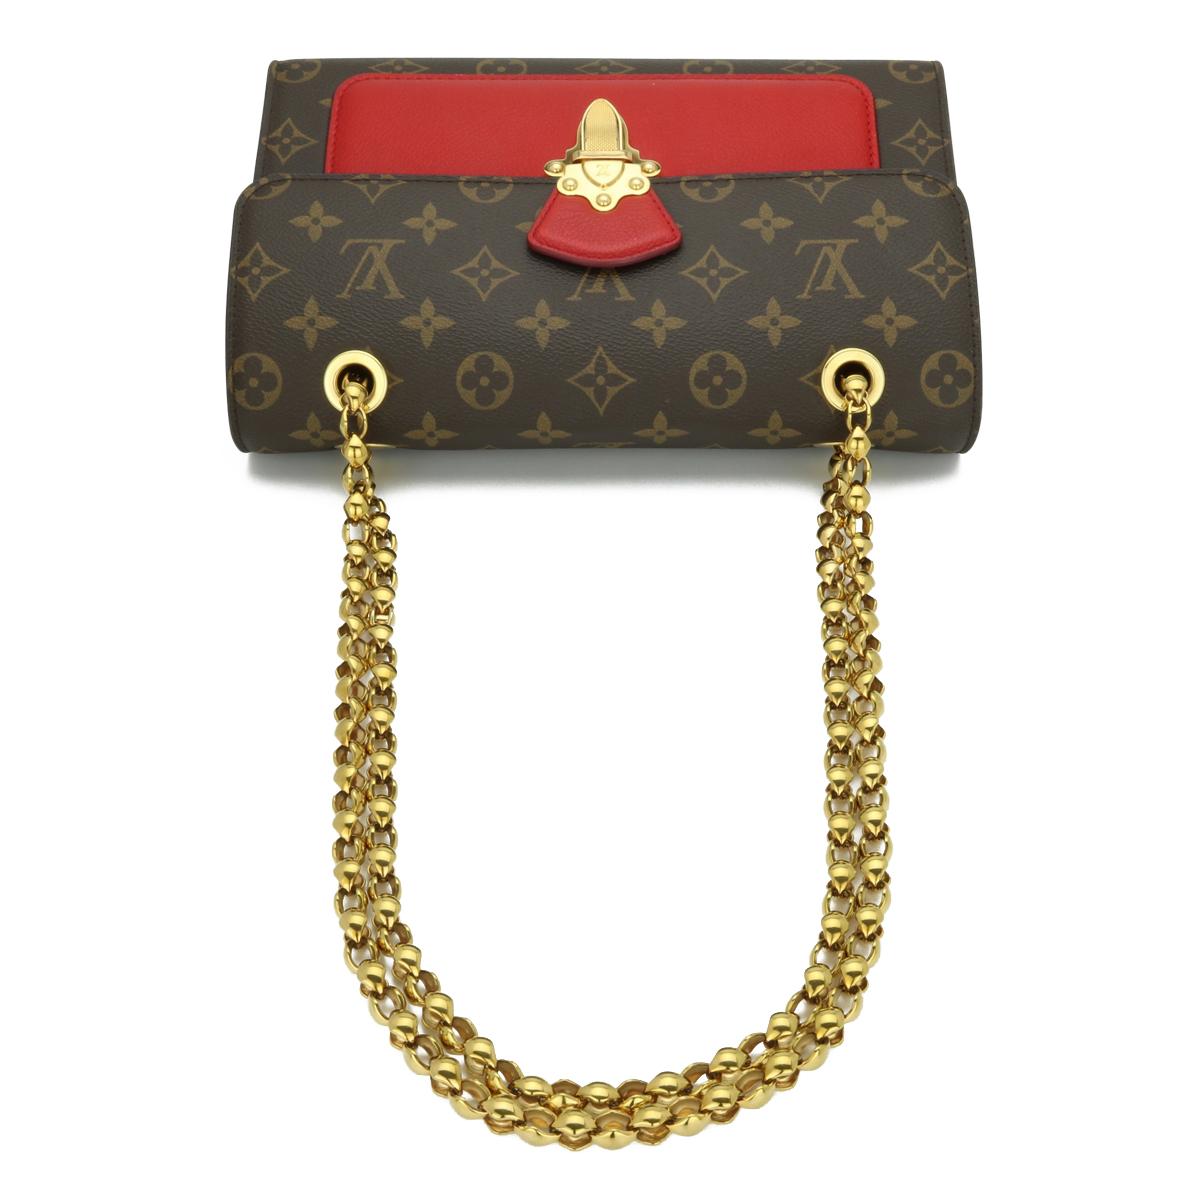 Louis Vuitton Victoire Monogram Bag with Cherry Red Interior 2016 For Sale 8